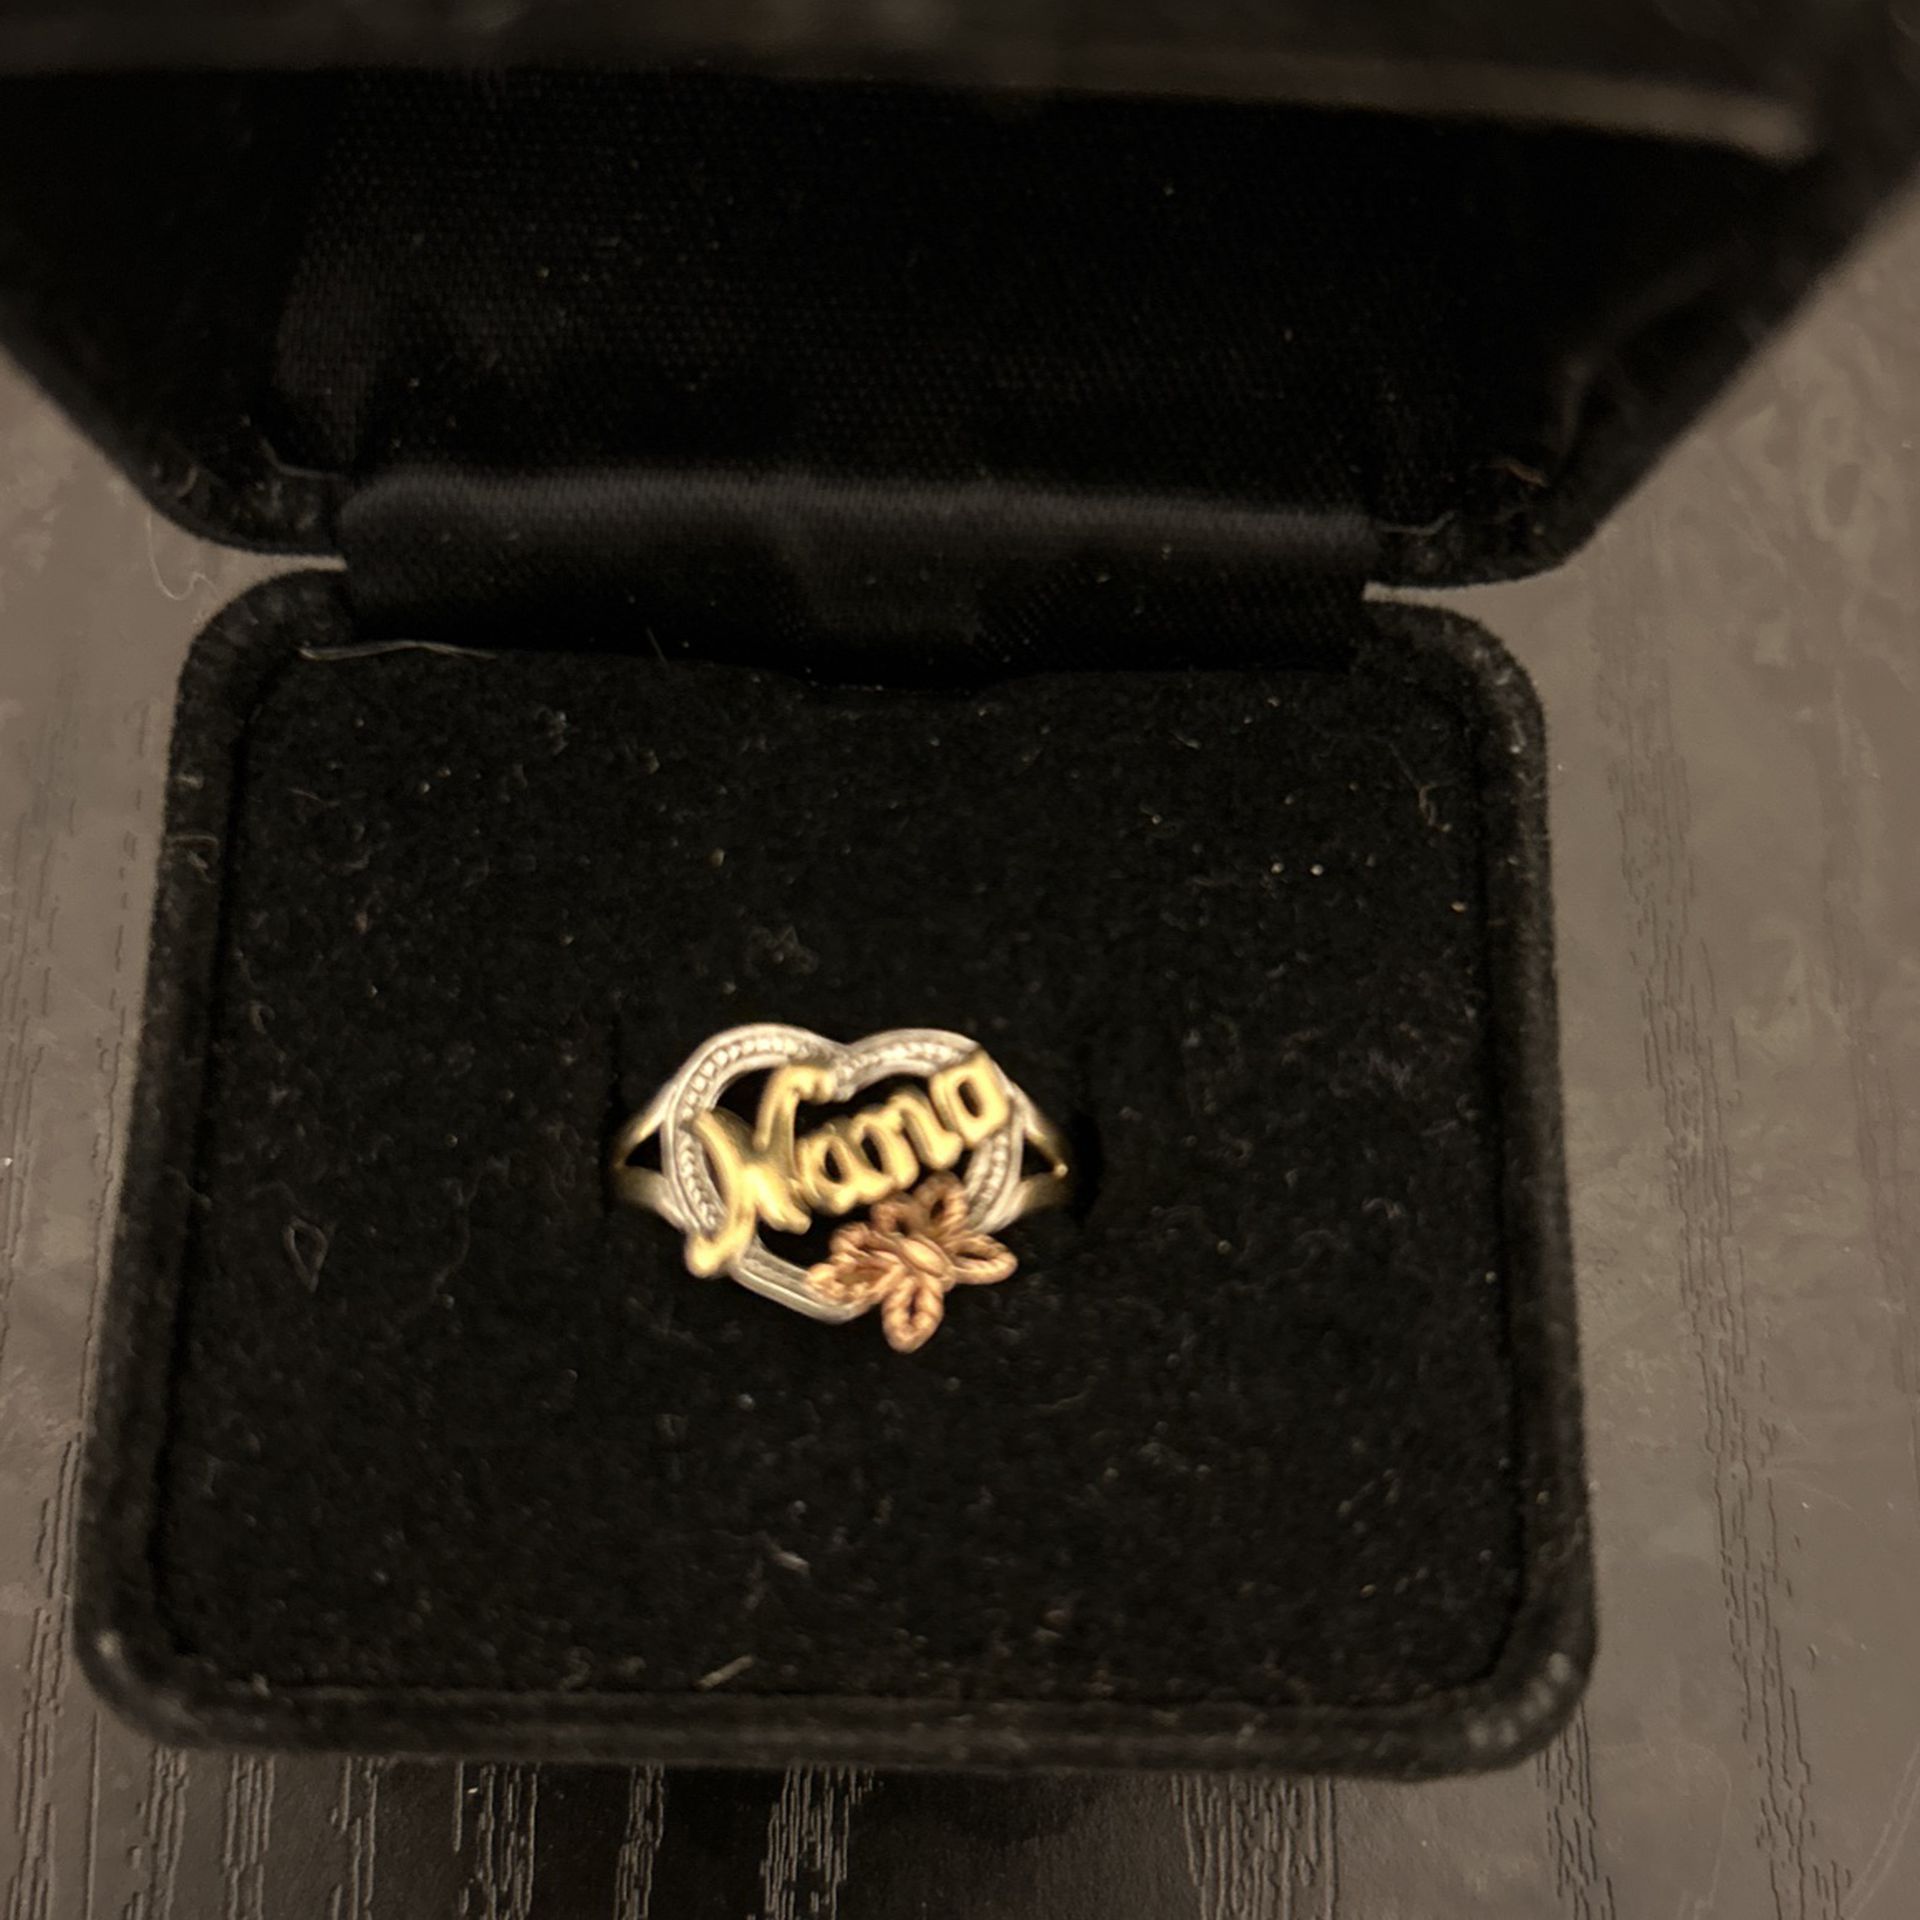 10k Ring With “nana” On It